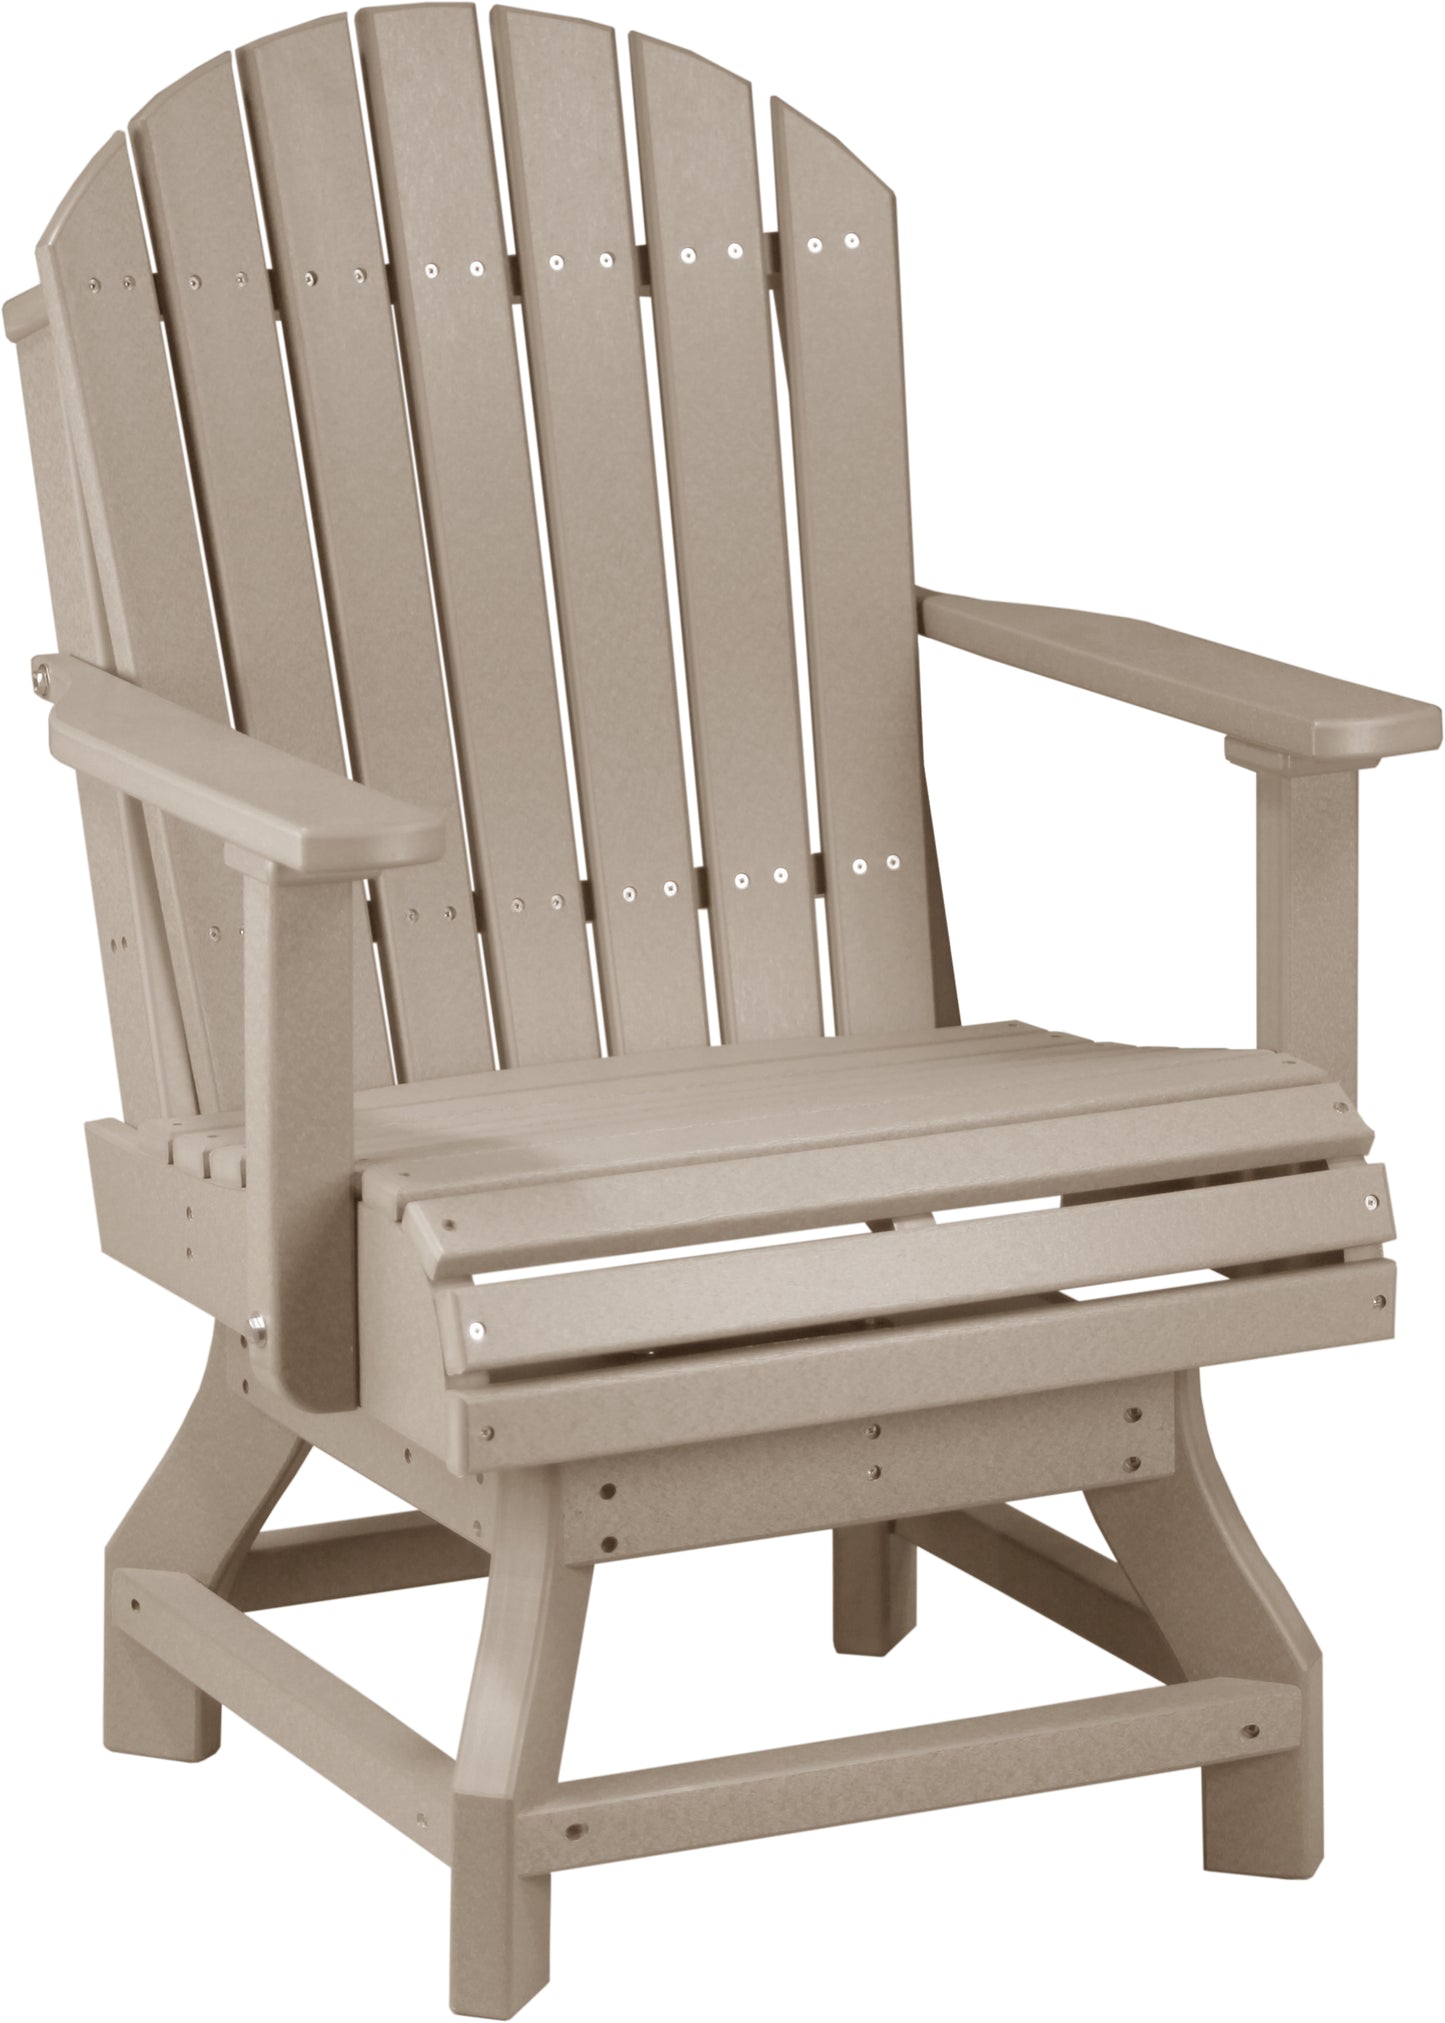 LuxCraft Recycled Plastic Adirondack Swivel Chair with Arms (DINING HEIGHT) - LEAD TIME TO SHIP 3 TO 4 WEEKS